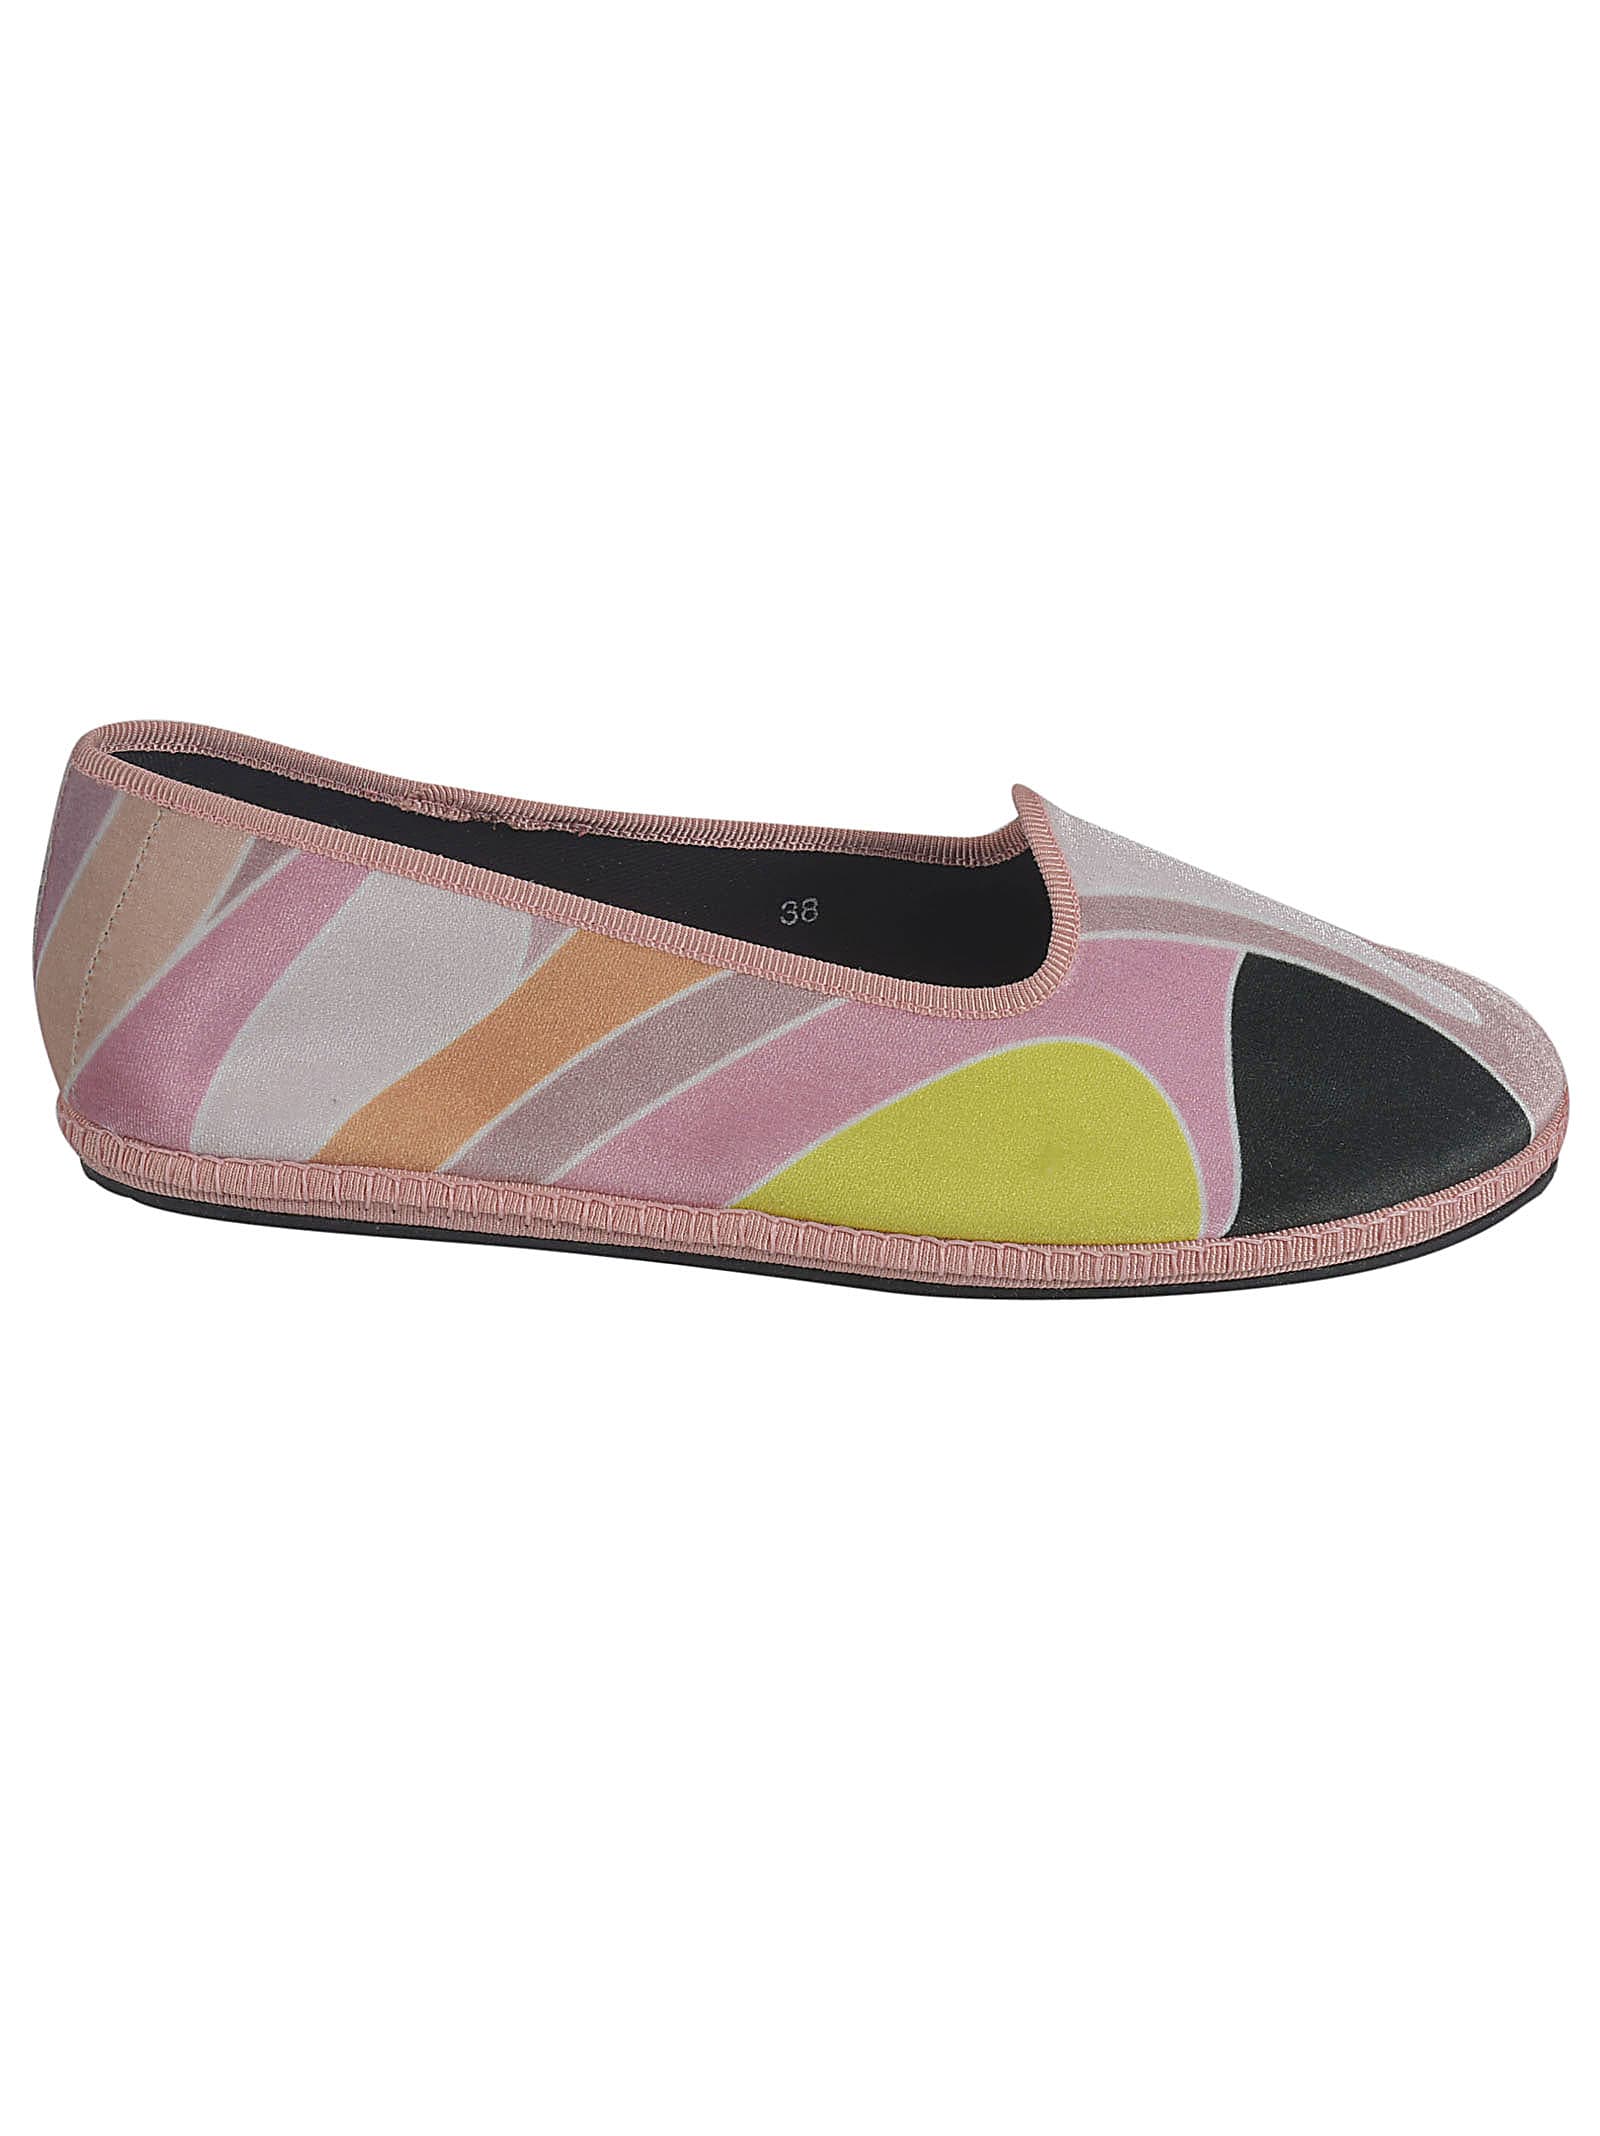 Buy Emilio Pucci Printed Espadrillas online, shop Emilio Pucci shoes with free shipping